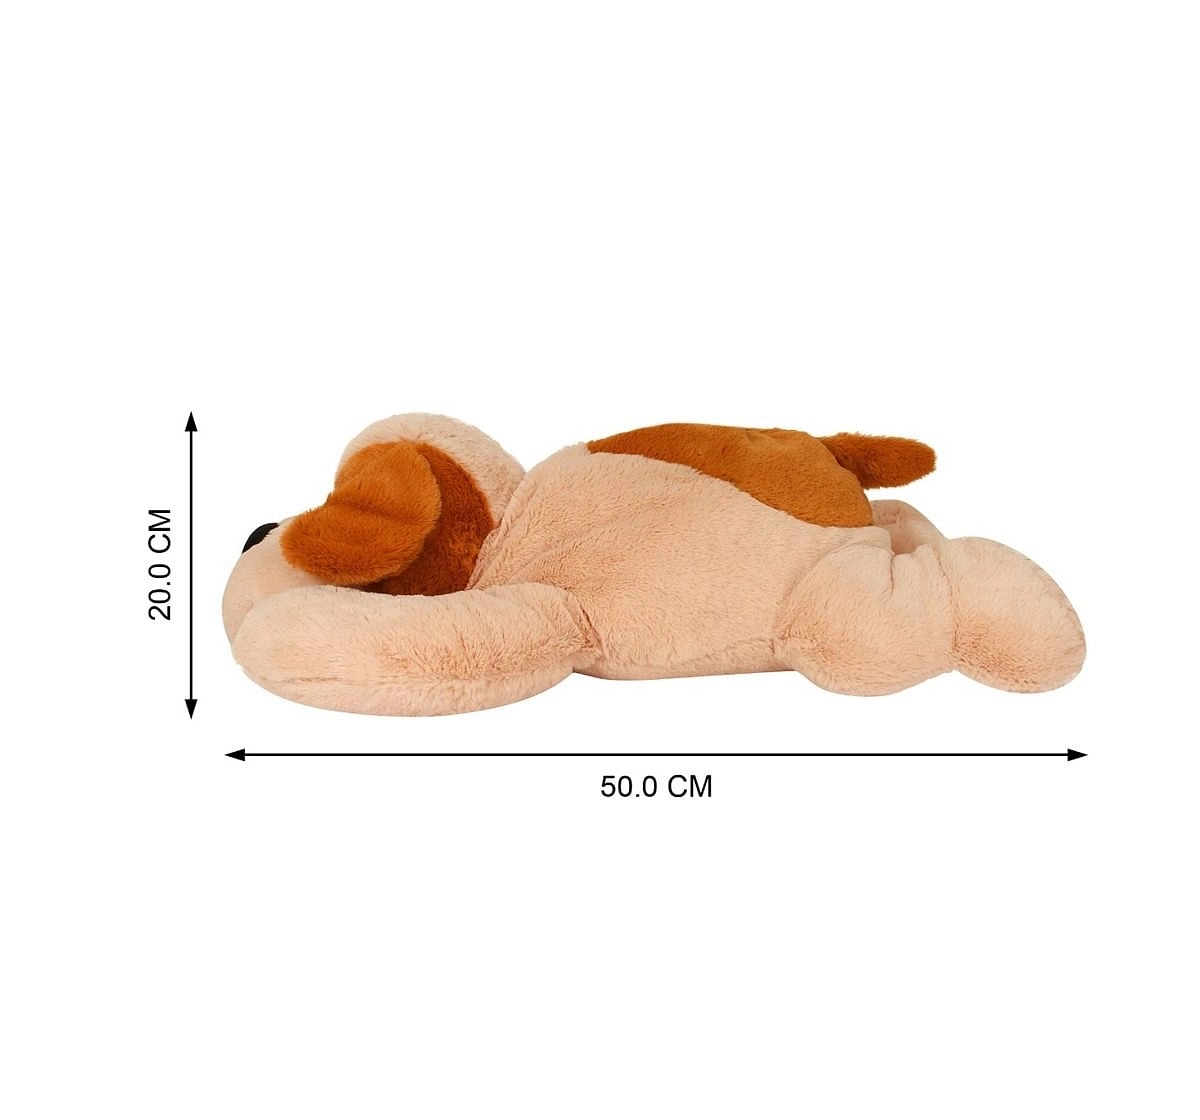 Qingdao Cuddles Laying Dog Cream And Brown Quirky Soft Toys for Kids age 12M+ - 20 Cm 